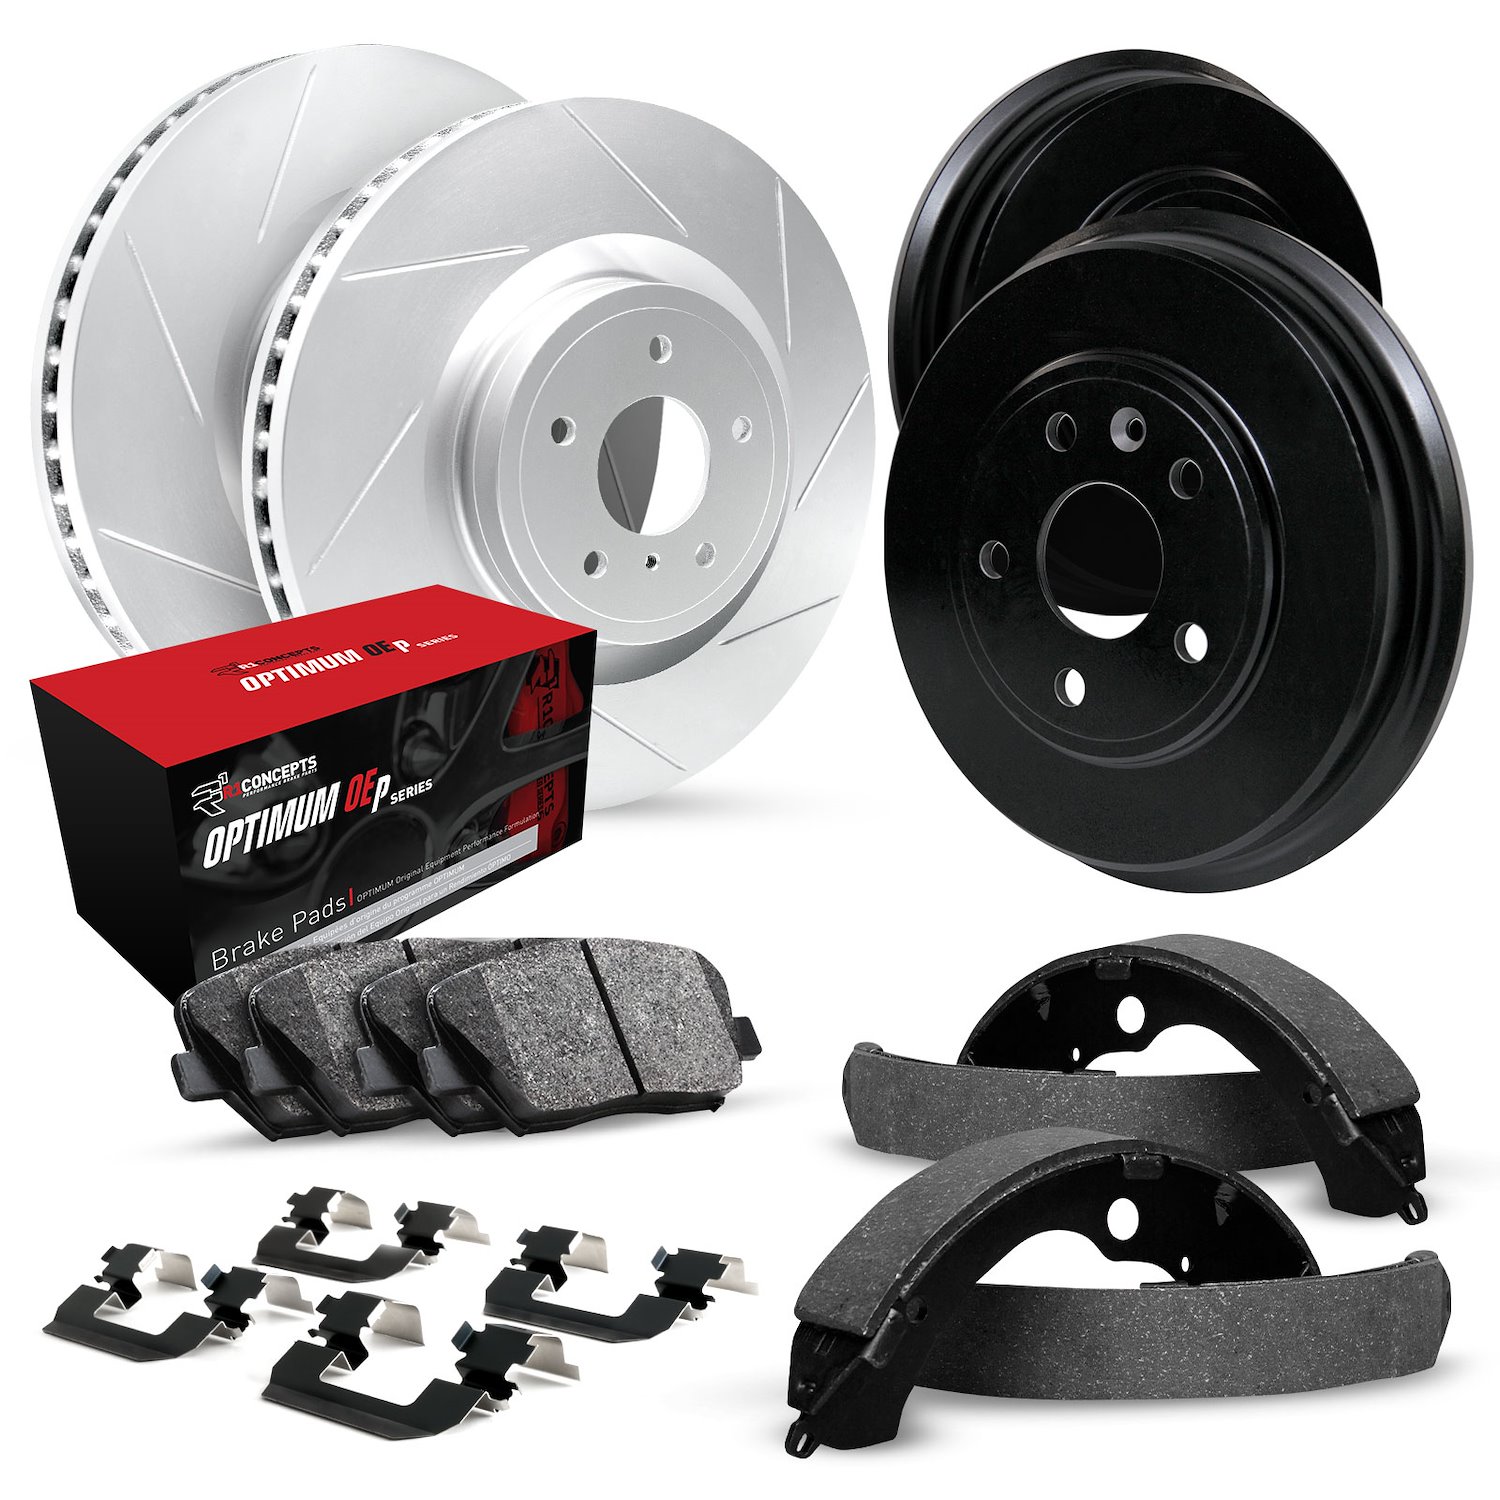 GEO-Carbon Slotted Brake Rotor & Drum Set w/Optimum OE Pads, Shoes, & Hardware, 1997-2000 Ford/Lincoln/Mercury/Mazda